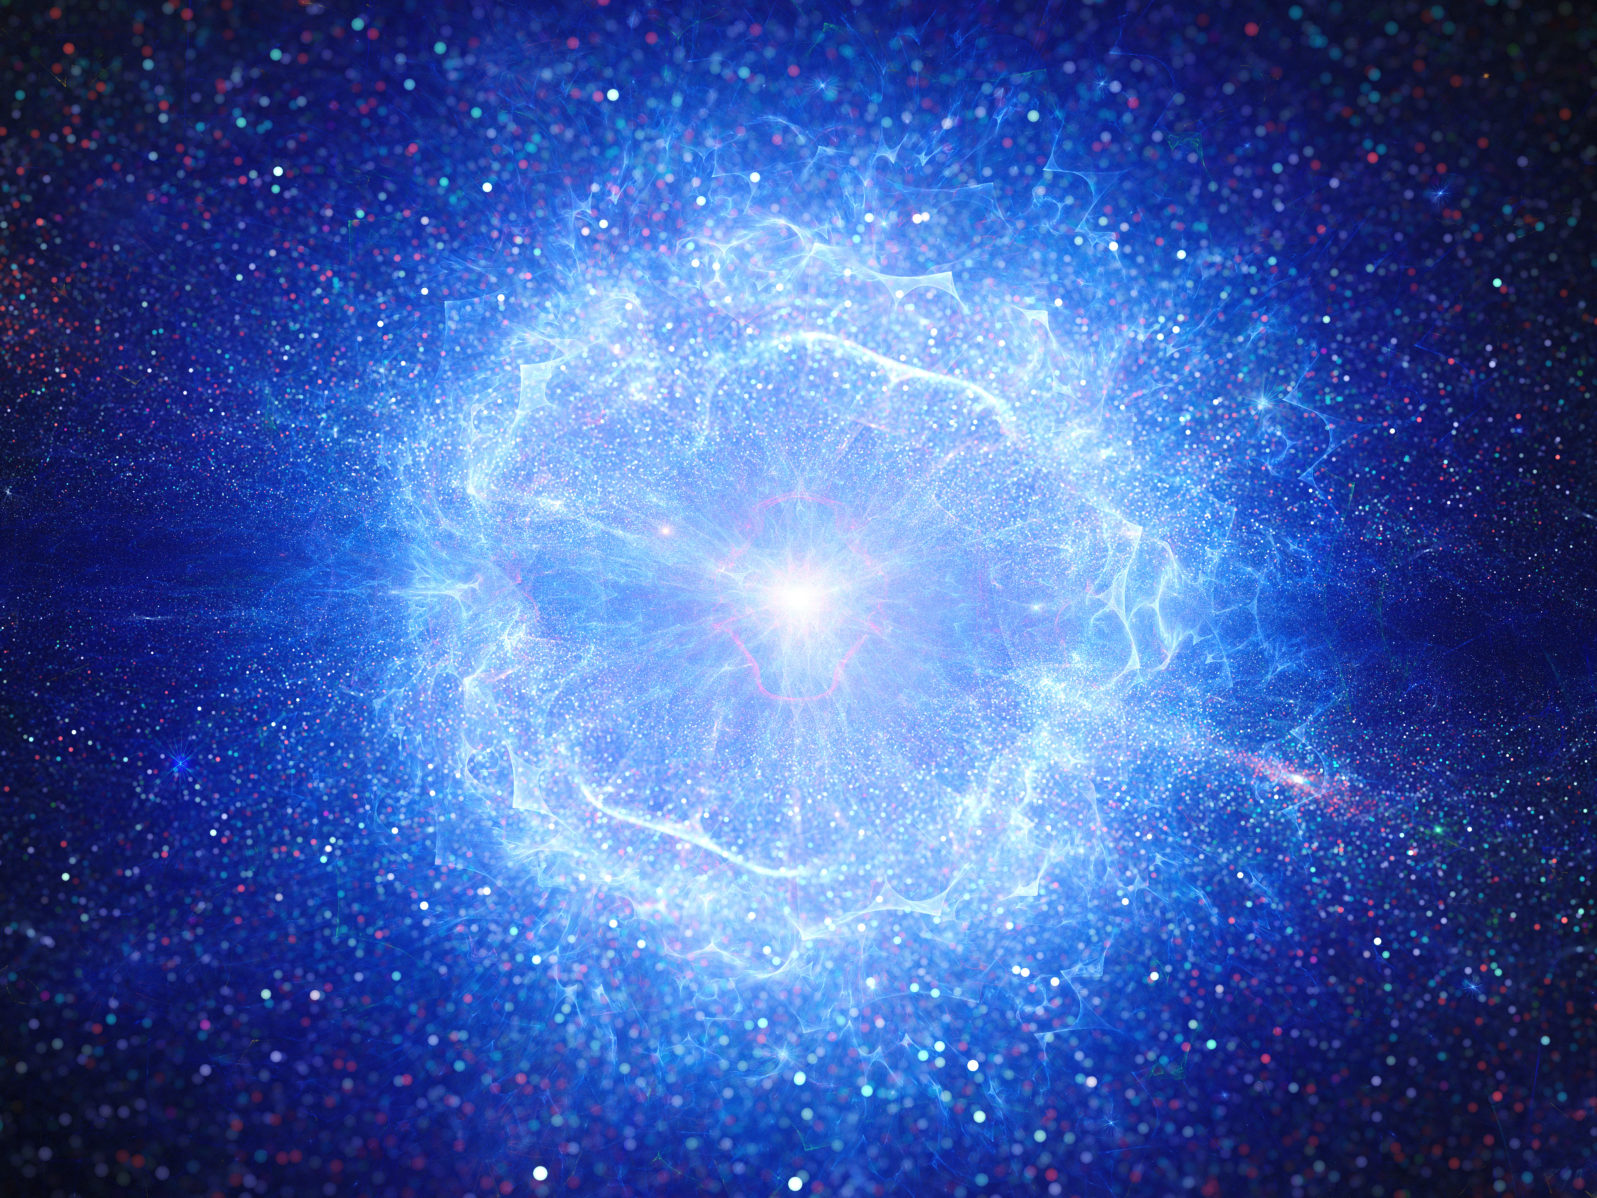 Big bang explosion in space